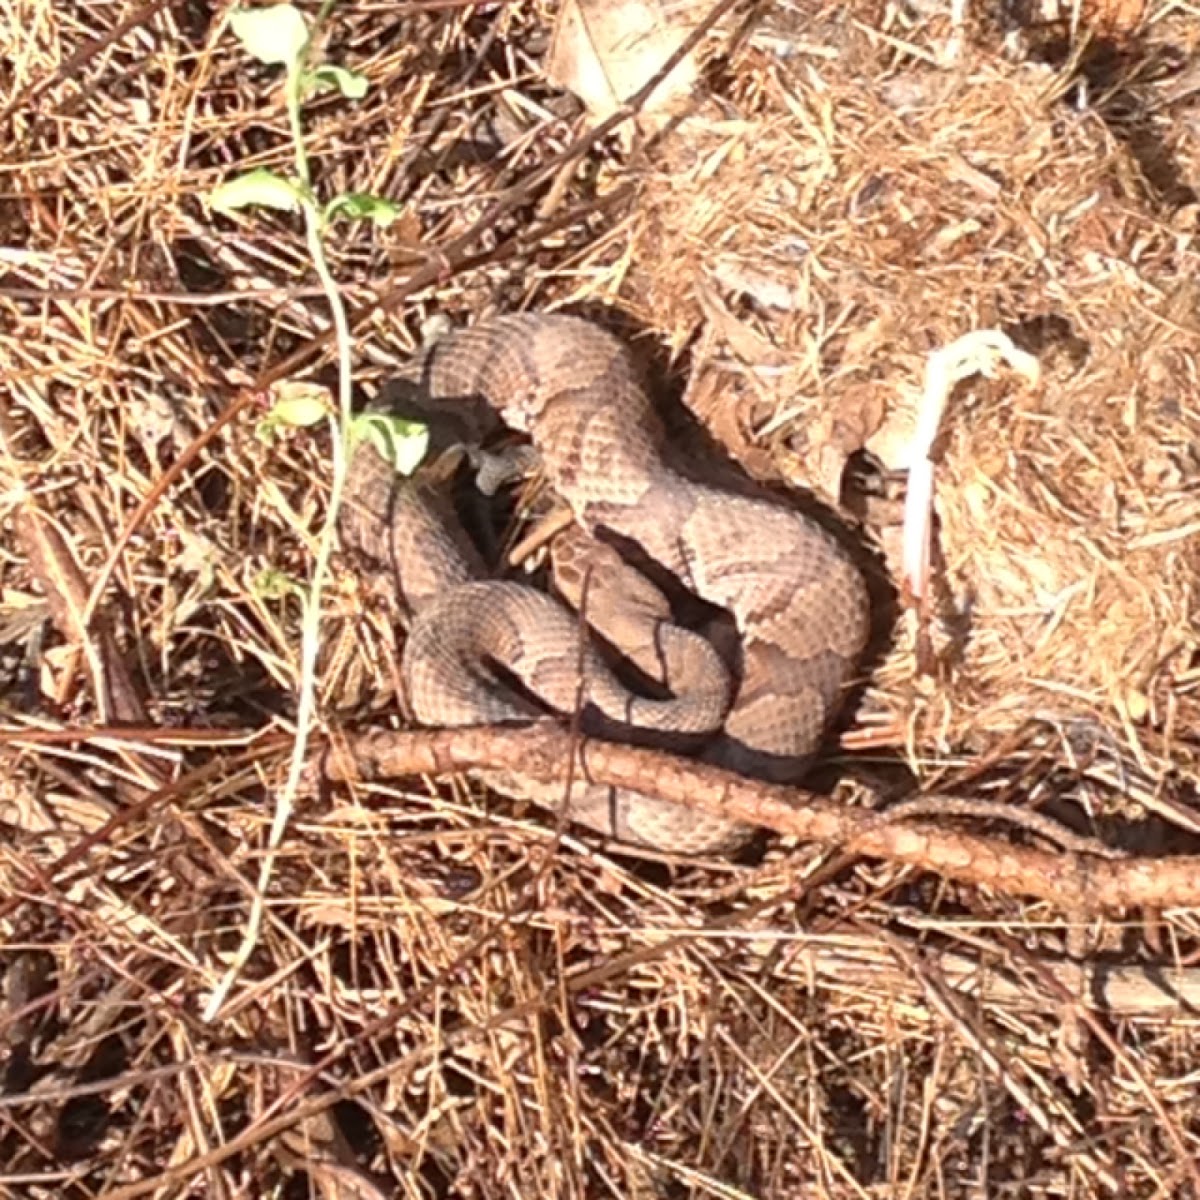 Northern copperhead